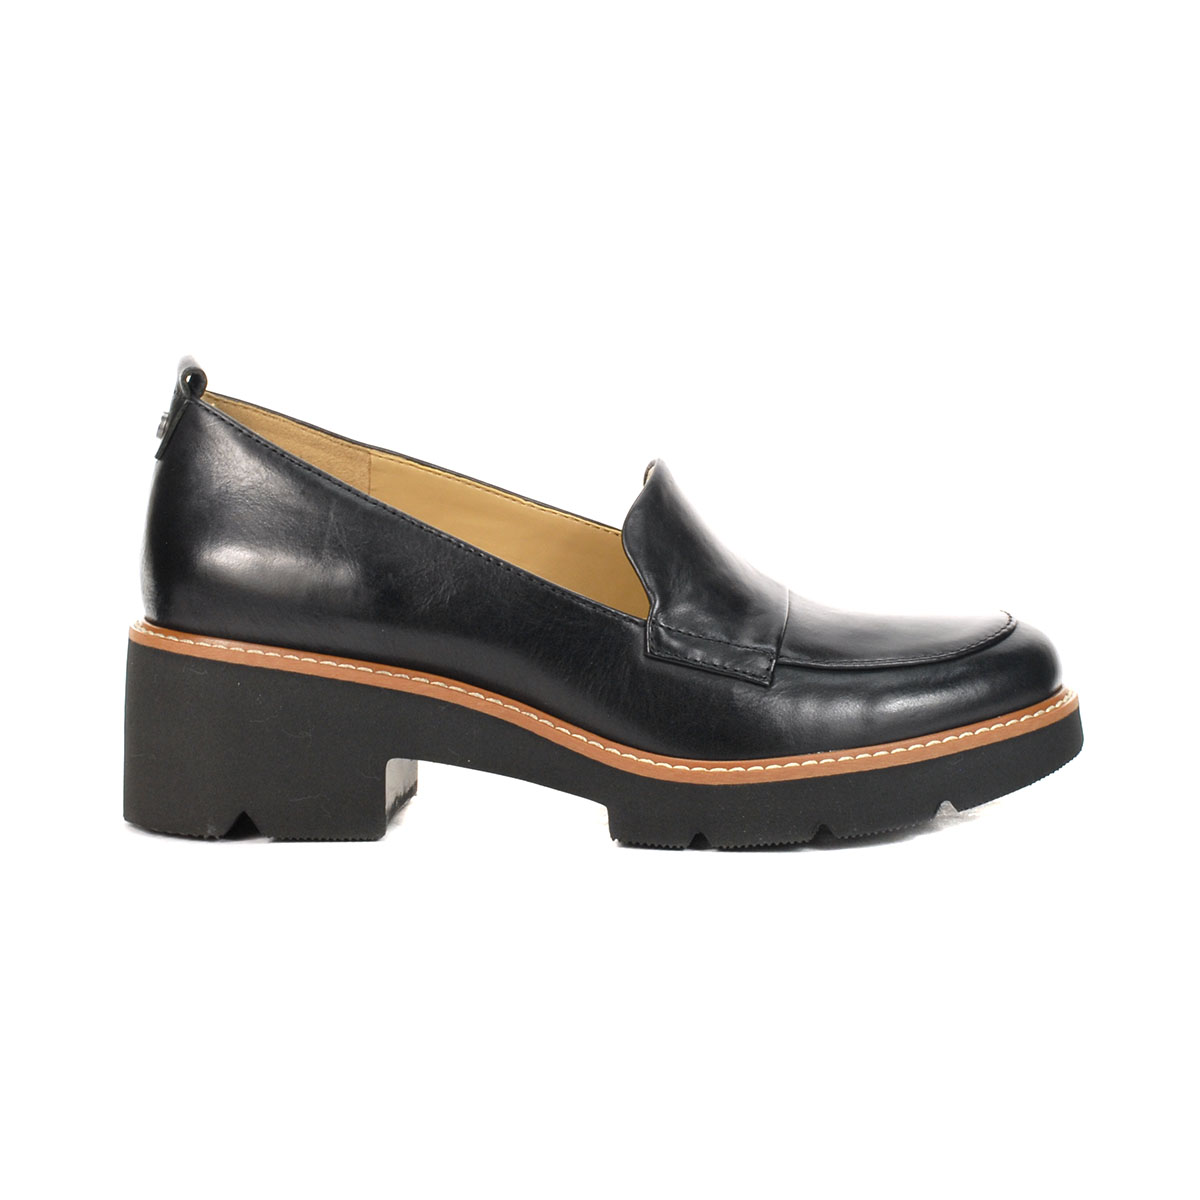 Naturalizer Darry Black Leather Loafers H7079L1001 - WOOKI.COM